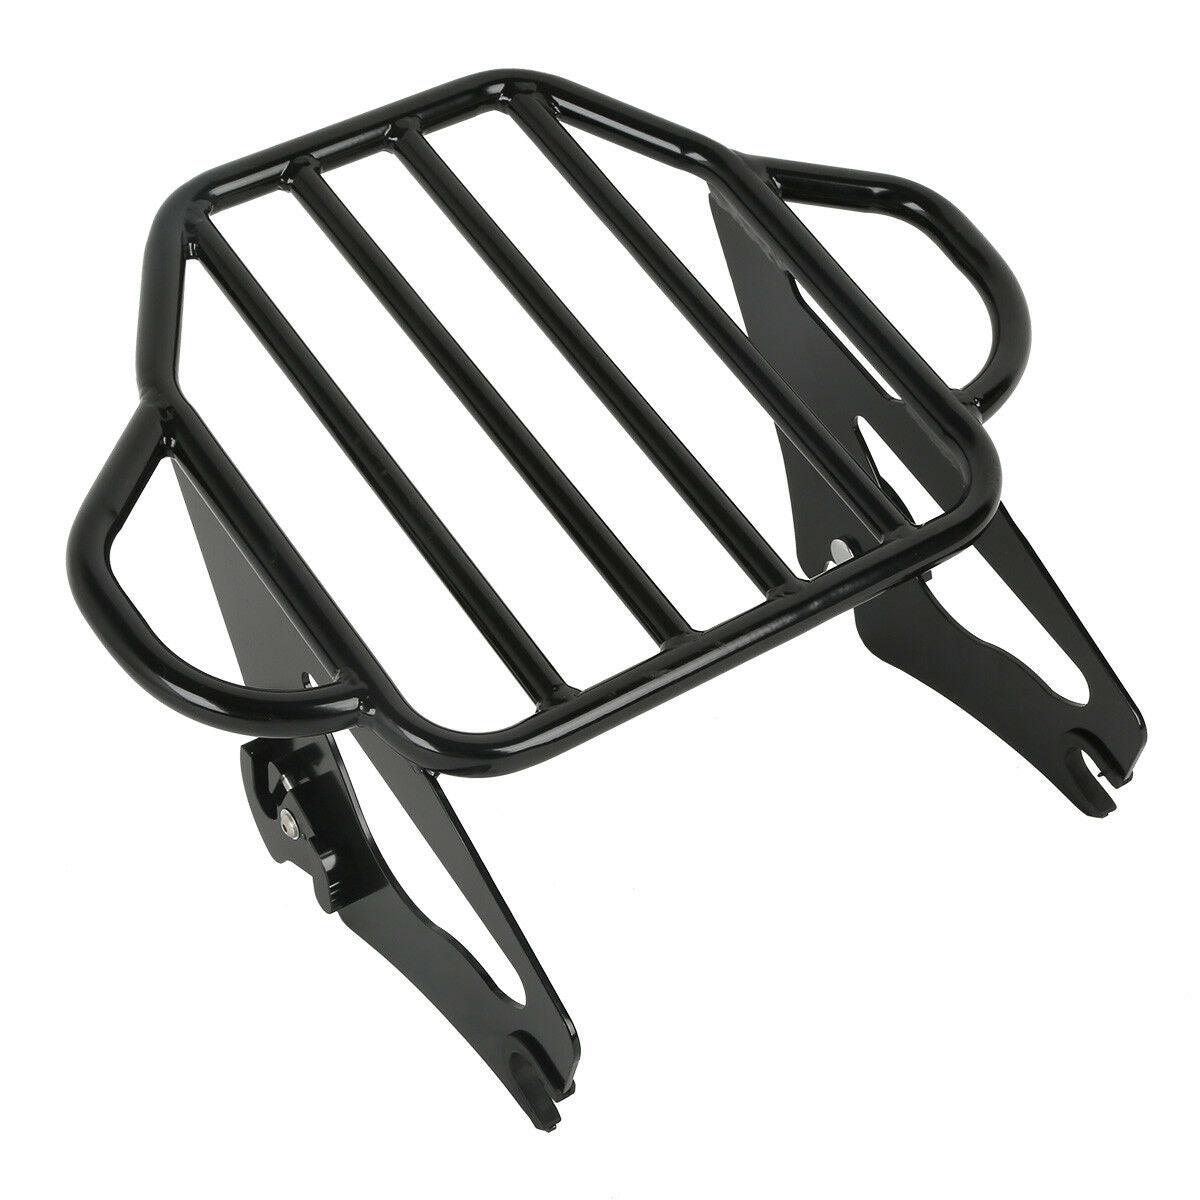 Detachable Luggage Rack Fit For Harley Electra Glide Road King Glide 09-21 2019 - Moto Life Products